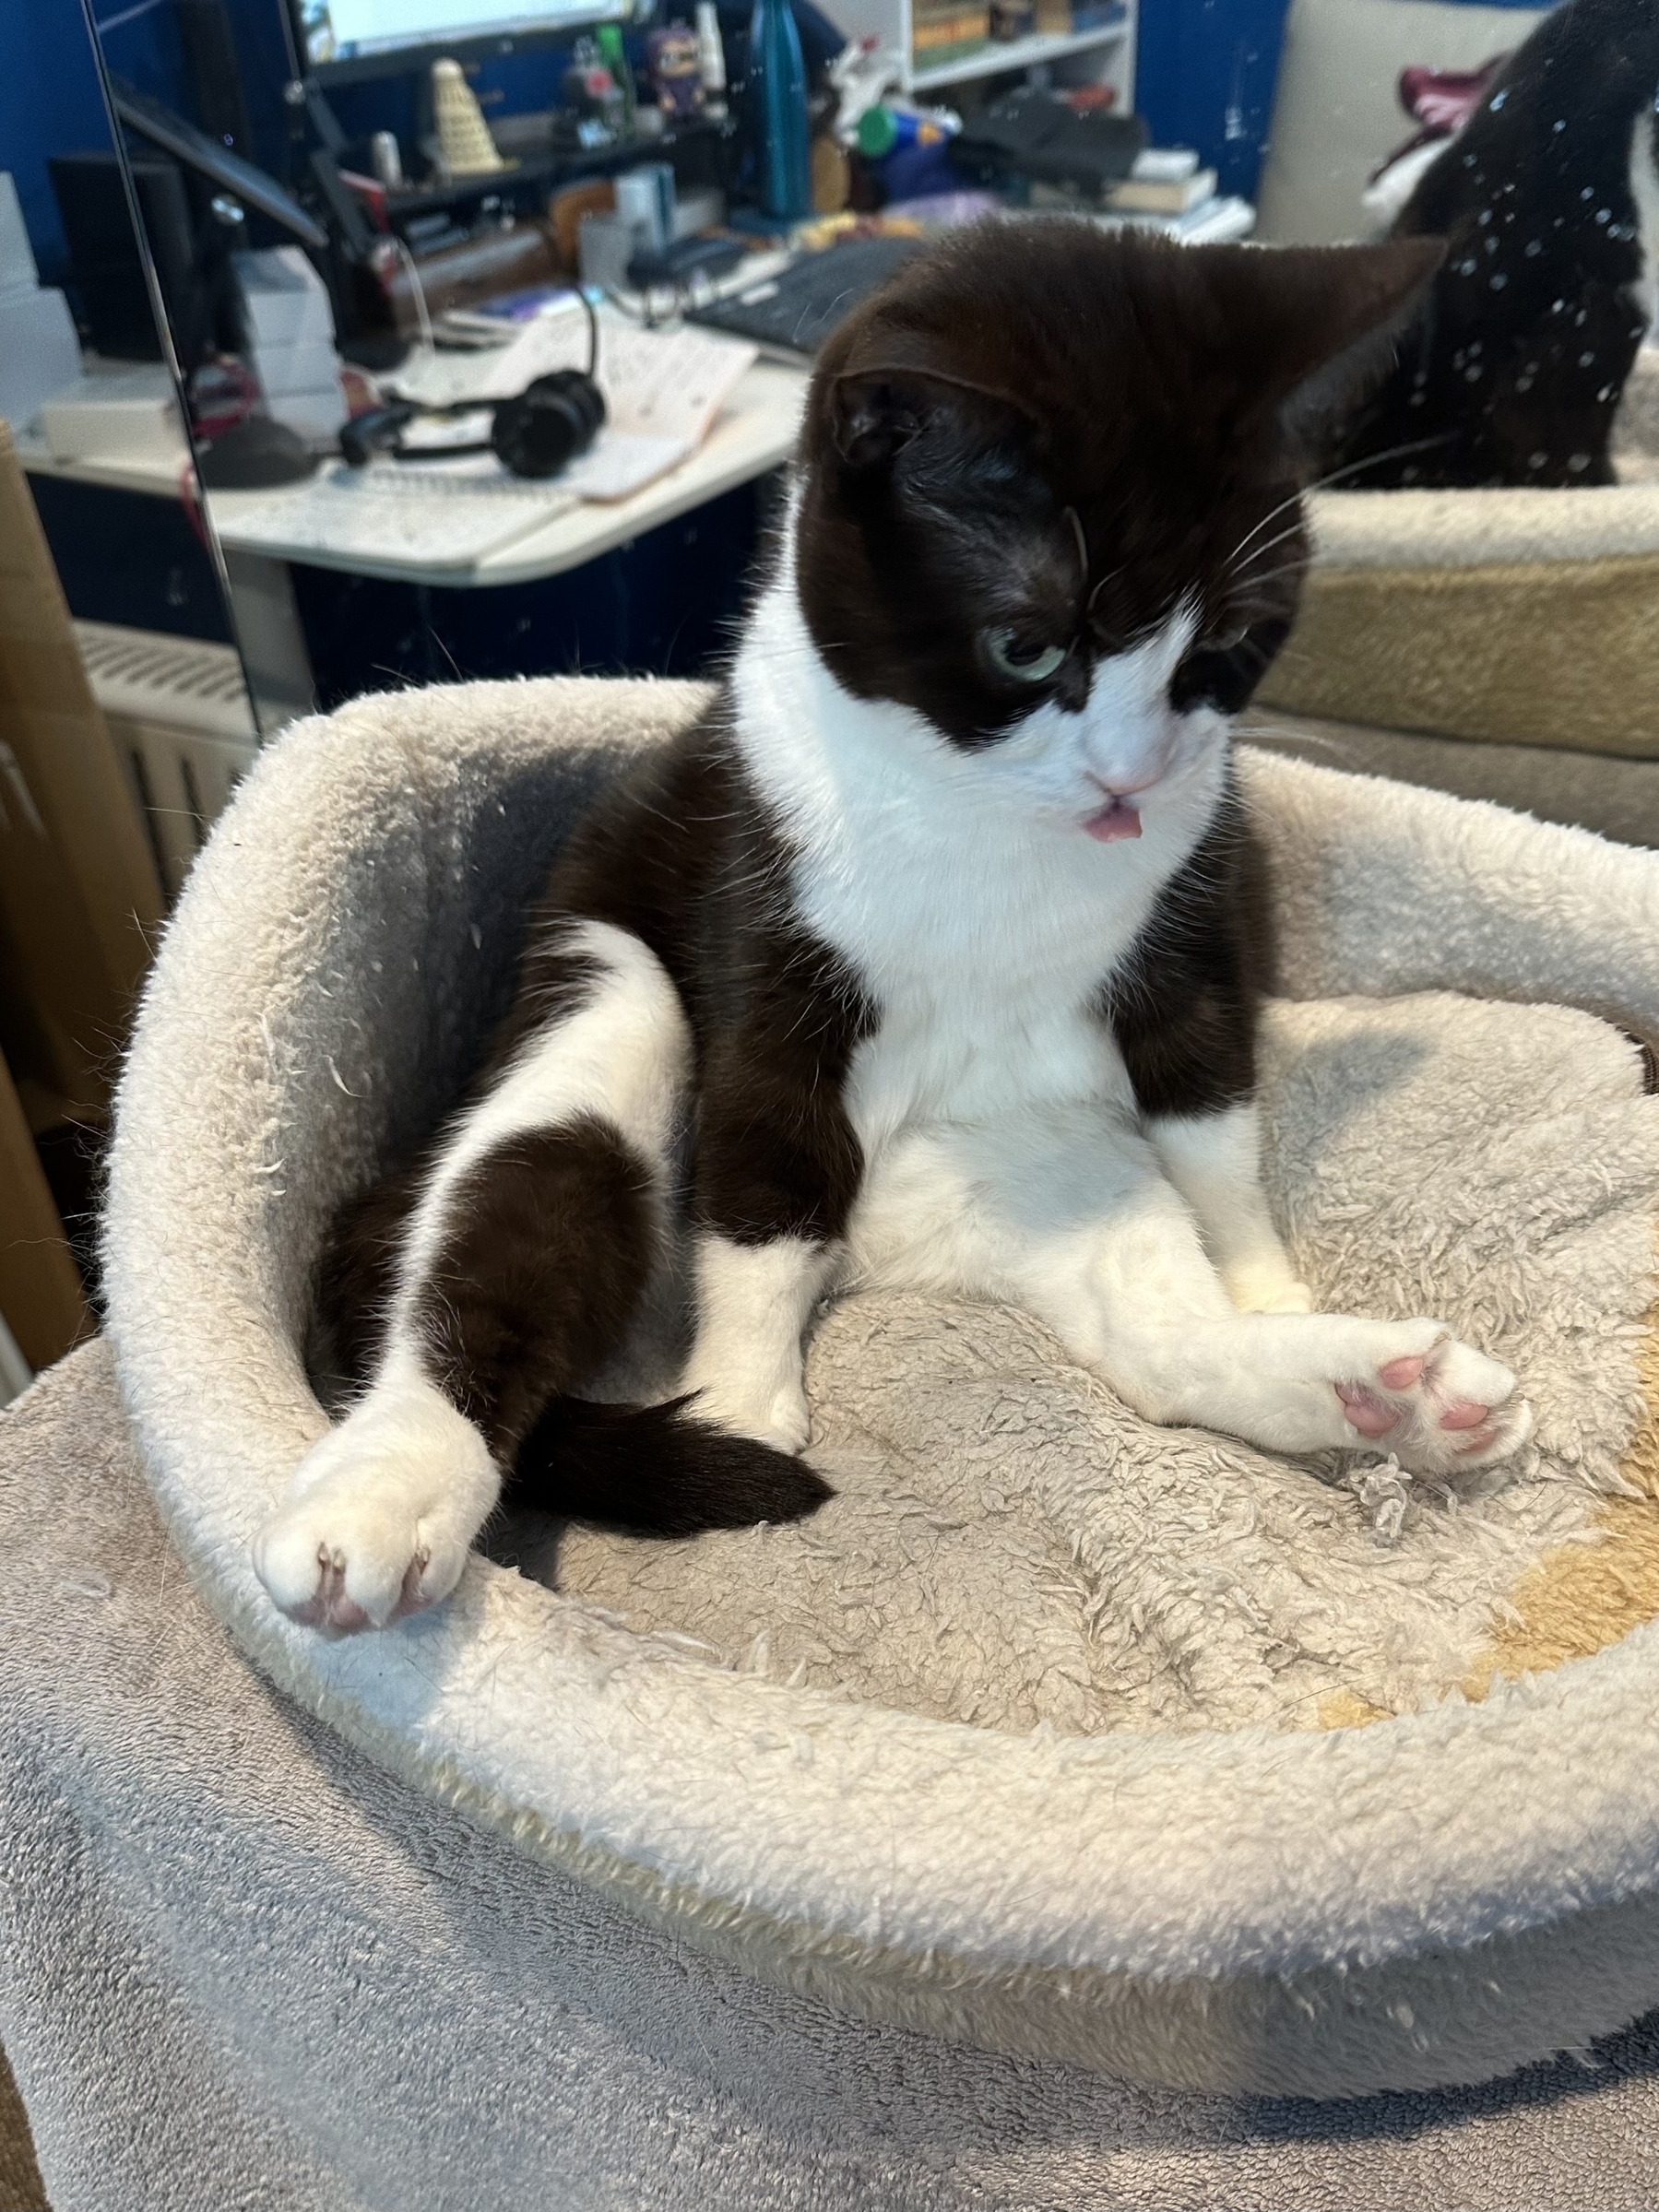 A black and white cat sitting upright on a cat bed, her rear legs spread out and her tongue poking out. She looks like she has had a big day.